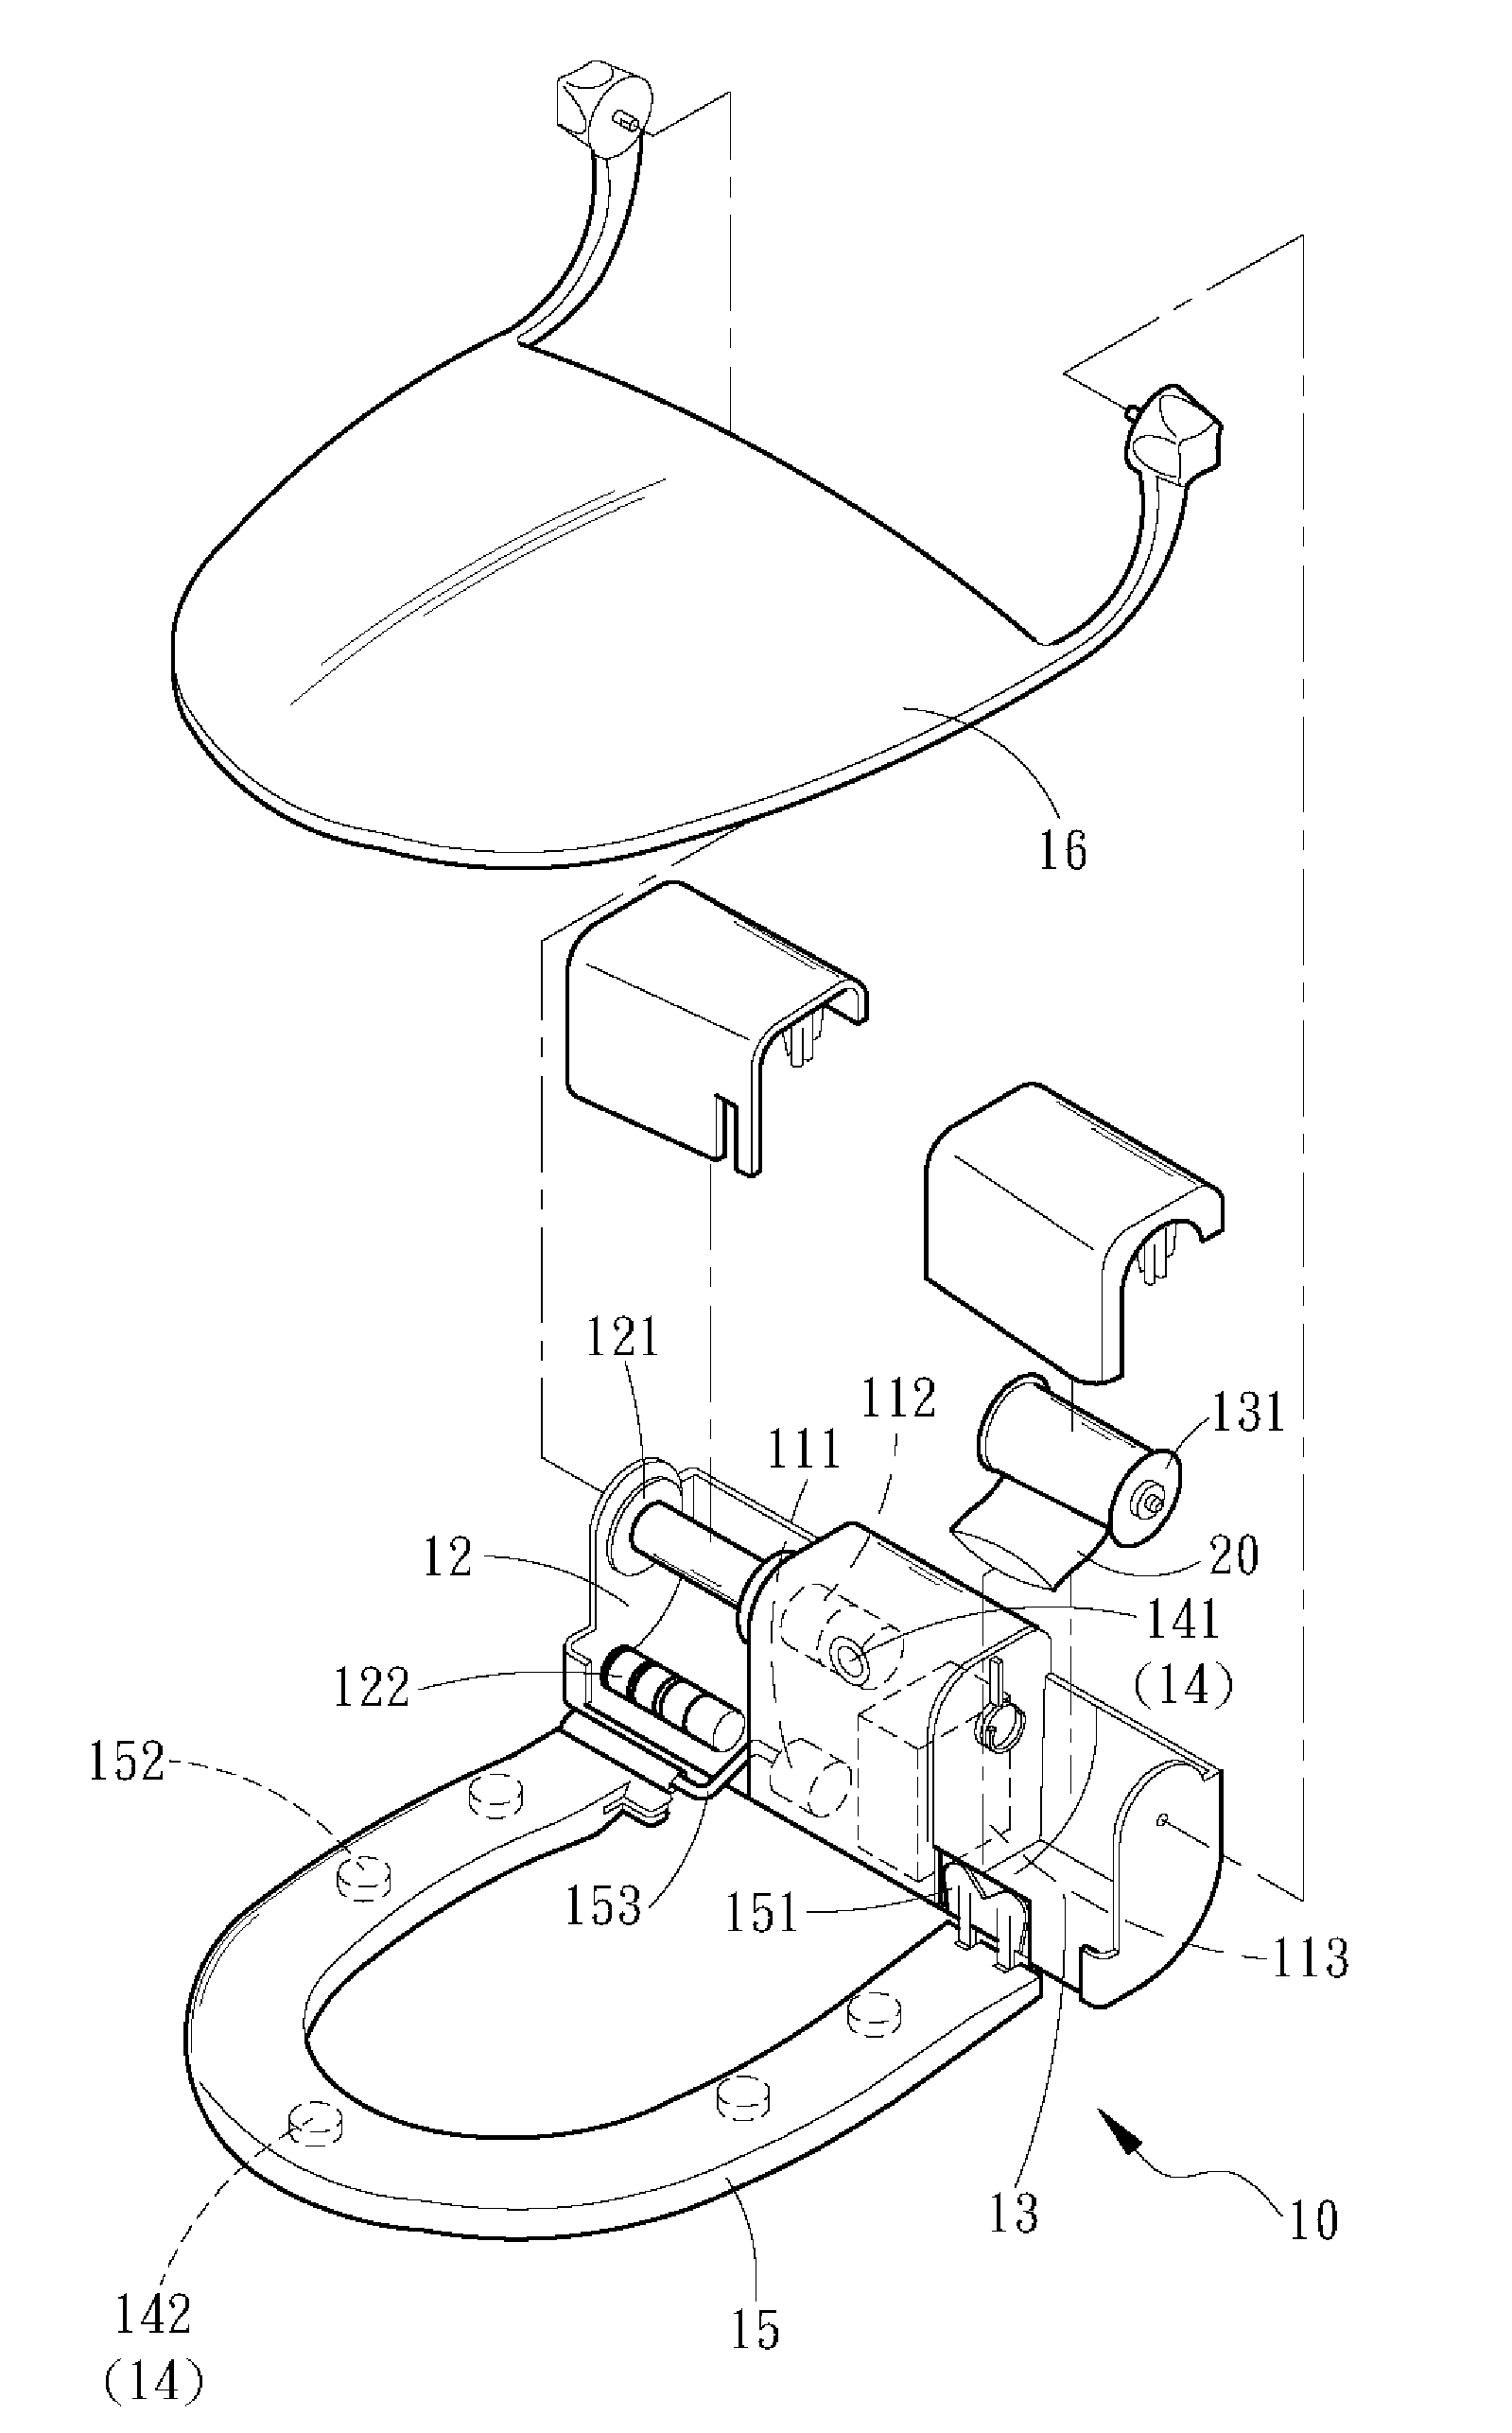 Sensing-Type Lavatory Seat Structure with Covering Film